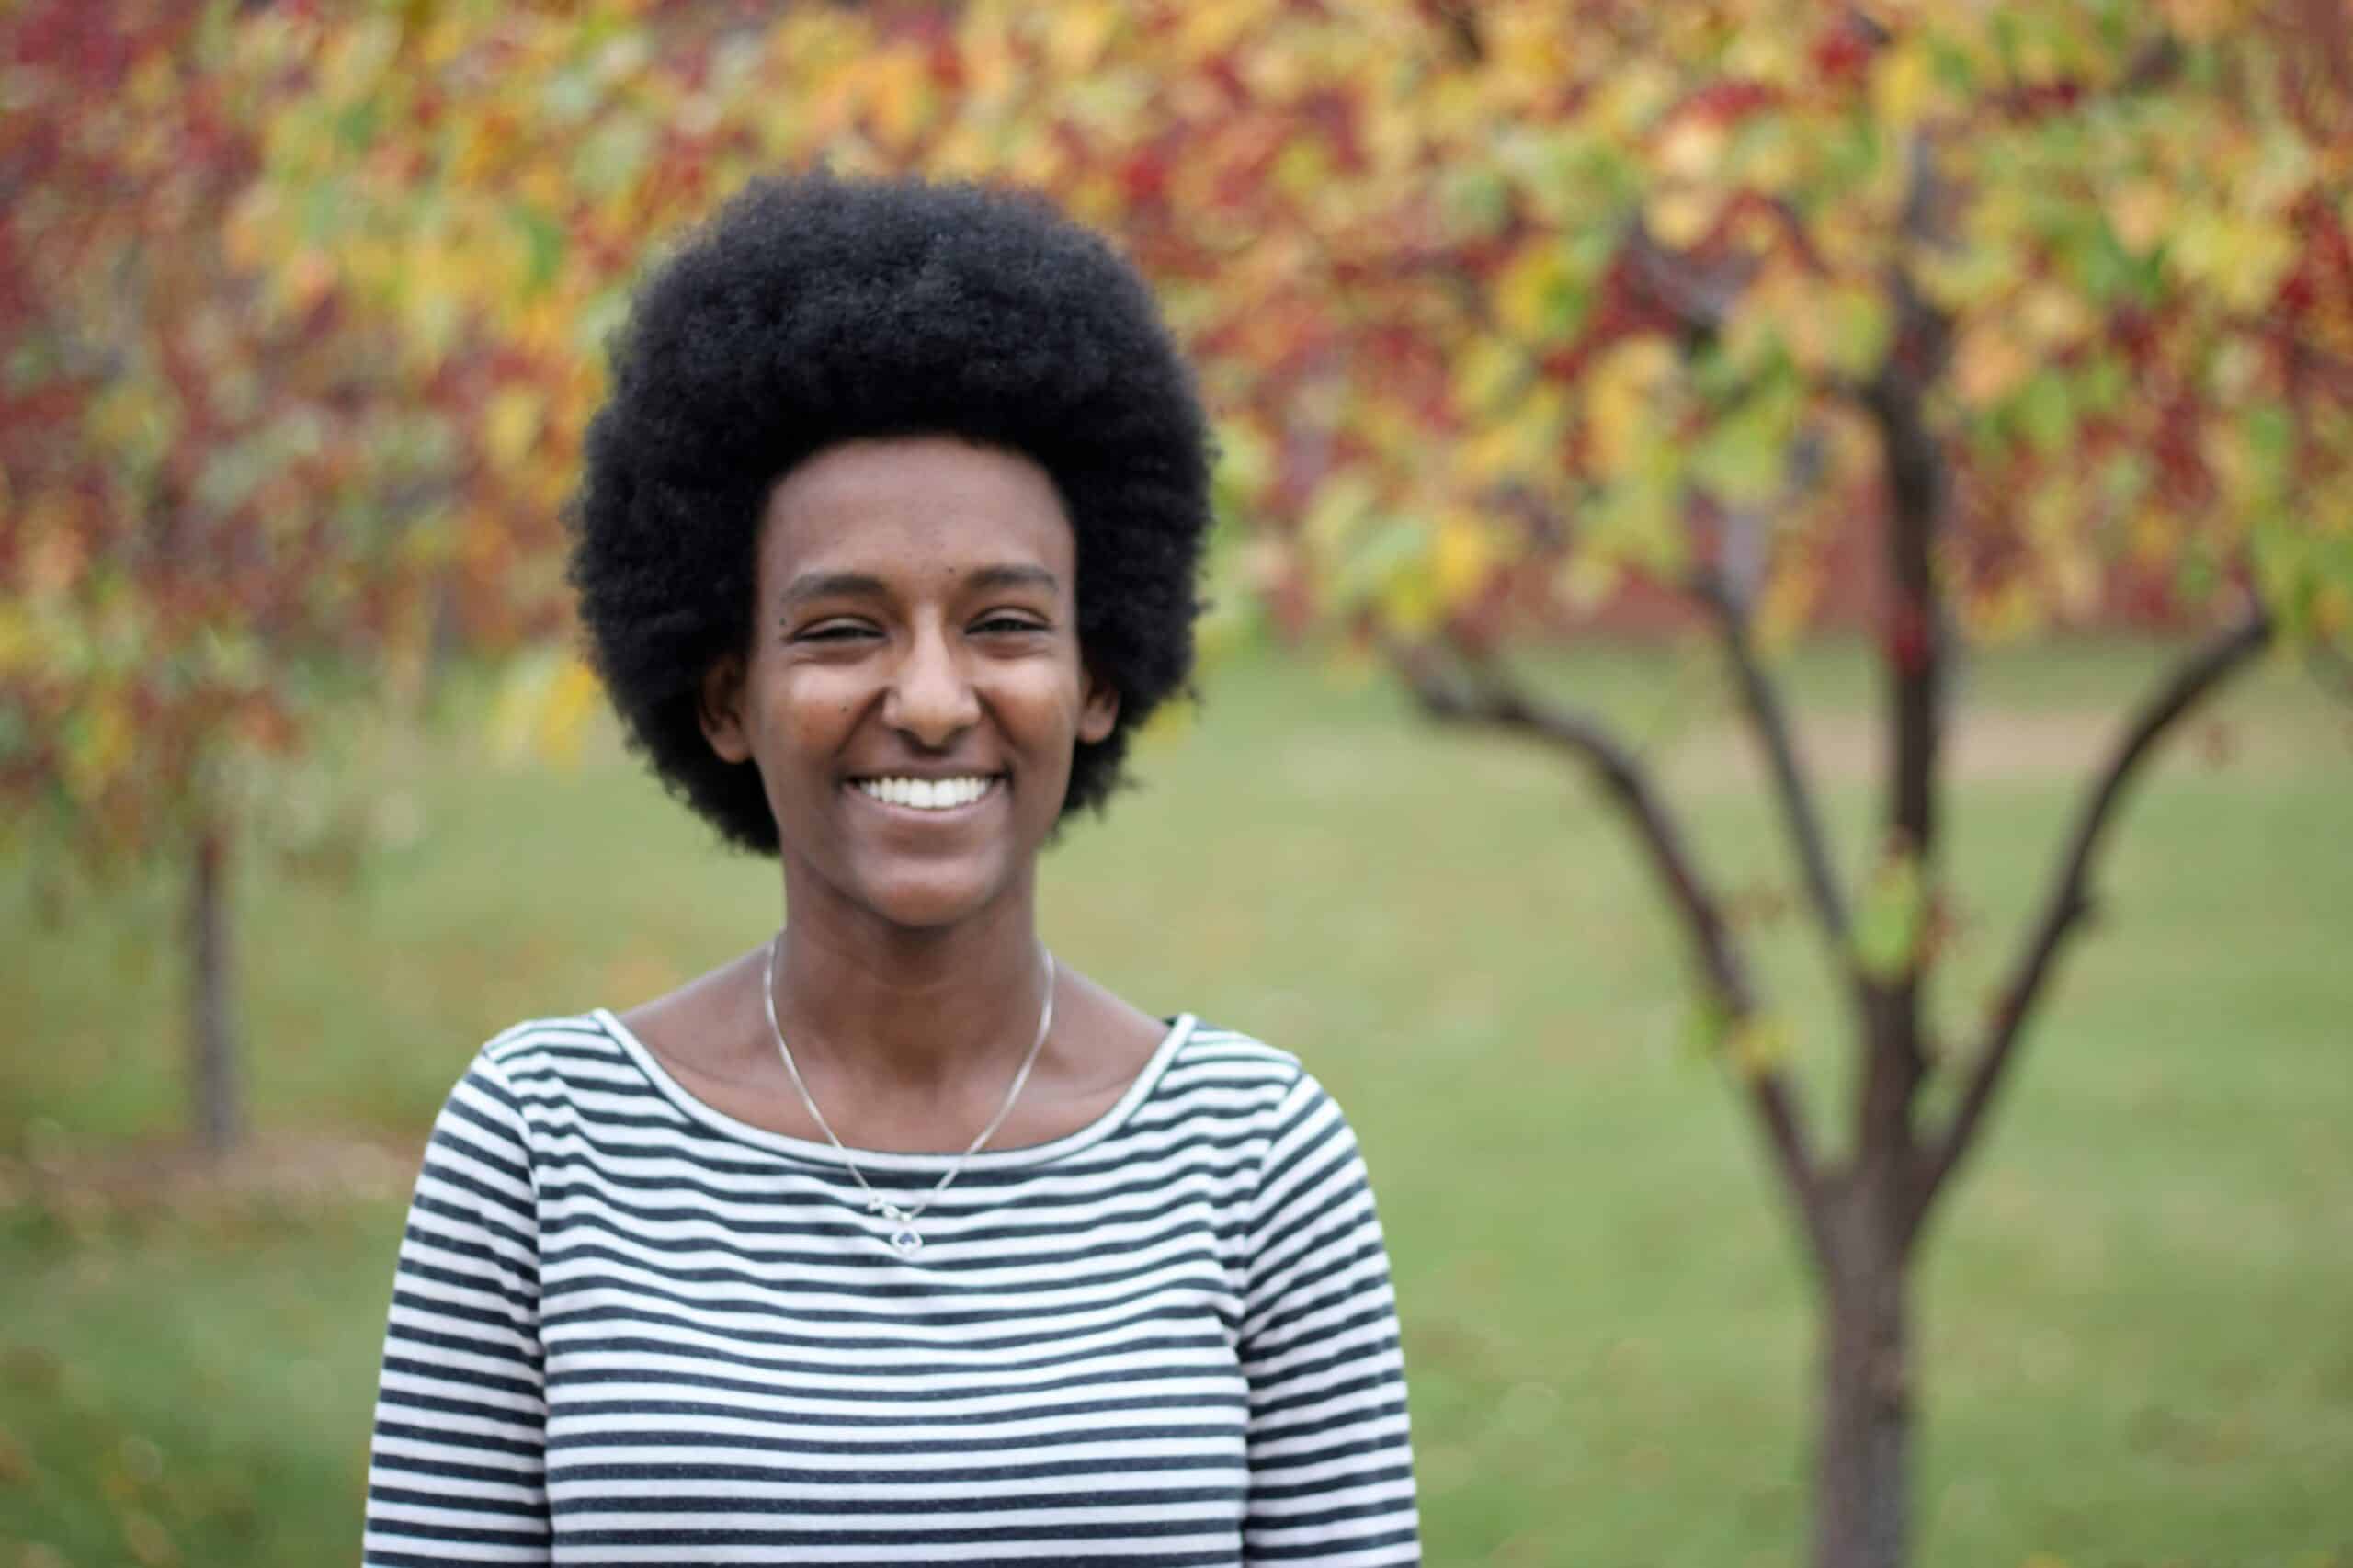 A portrait of a young woman with an afro smiling at the camera, fall foliage in the background.